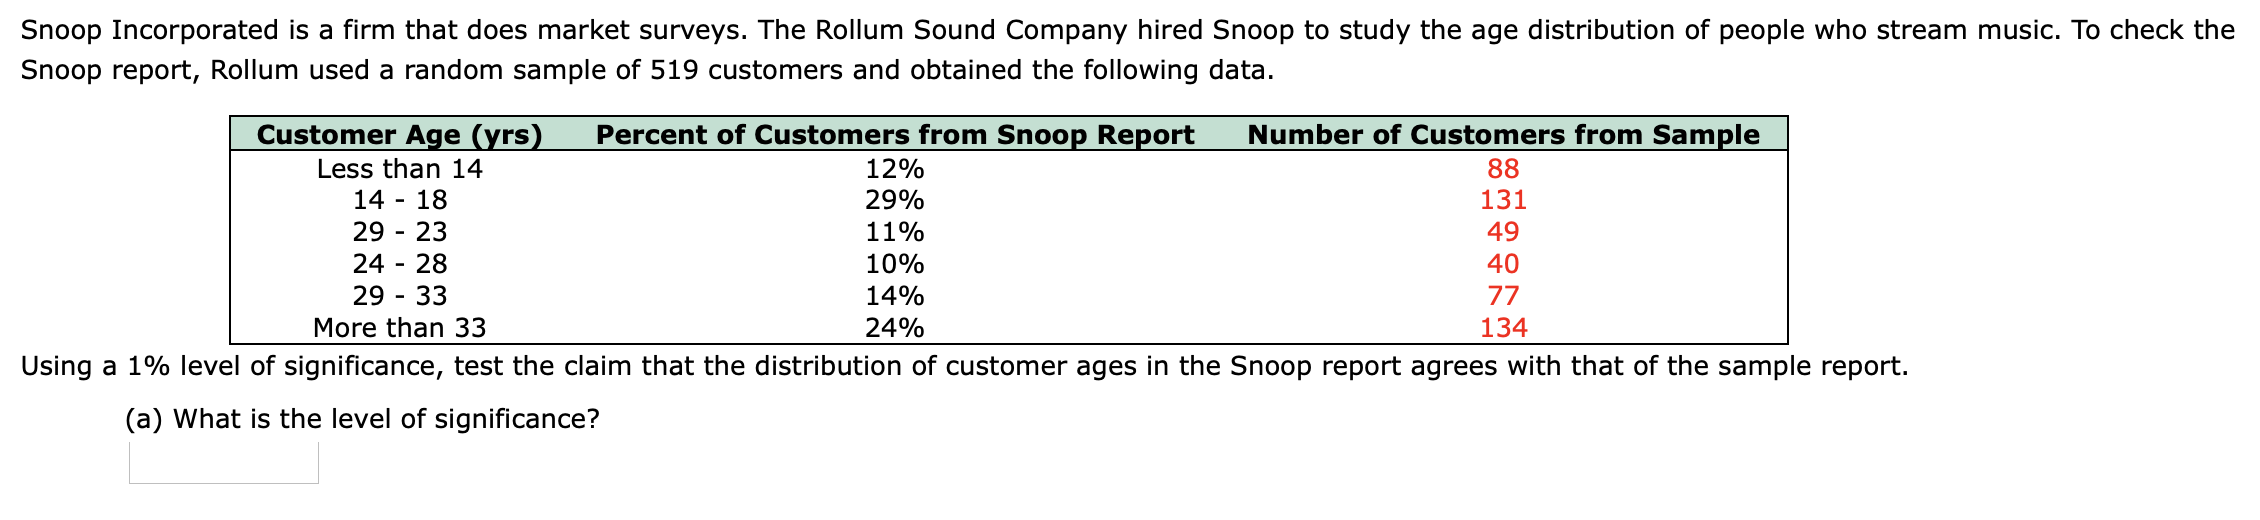 Snoop Incorporated is a firm that does market surveys. The Rollum Sound Company hired Snoop to study the age distribution of people who stream music. To check the
Snoop report, Rollum used a random sample of 519 customers and obtained the following data.
Percent of Customers from Snoop Report
Number of Customers from Sample
88
131
49
40
77
134
Customer Age (yrs)
Less than 14
14 - 18
29 - 23
24 - 28
29 - 33
More than 33
12%
29%
11%
10%
14%
24%
Using a 1% level of significance, test the claim that the distribution of customer ages in the Snoop report agrees with that of the sample report.
(a) What is the level of significance?
